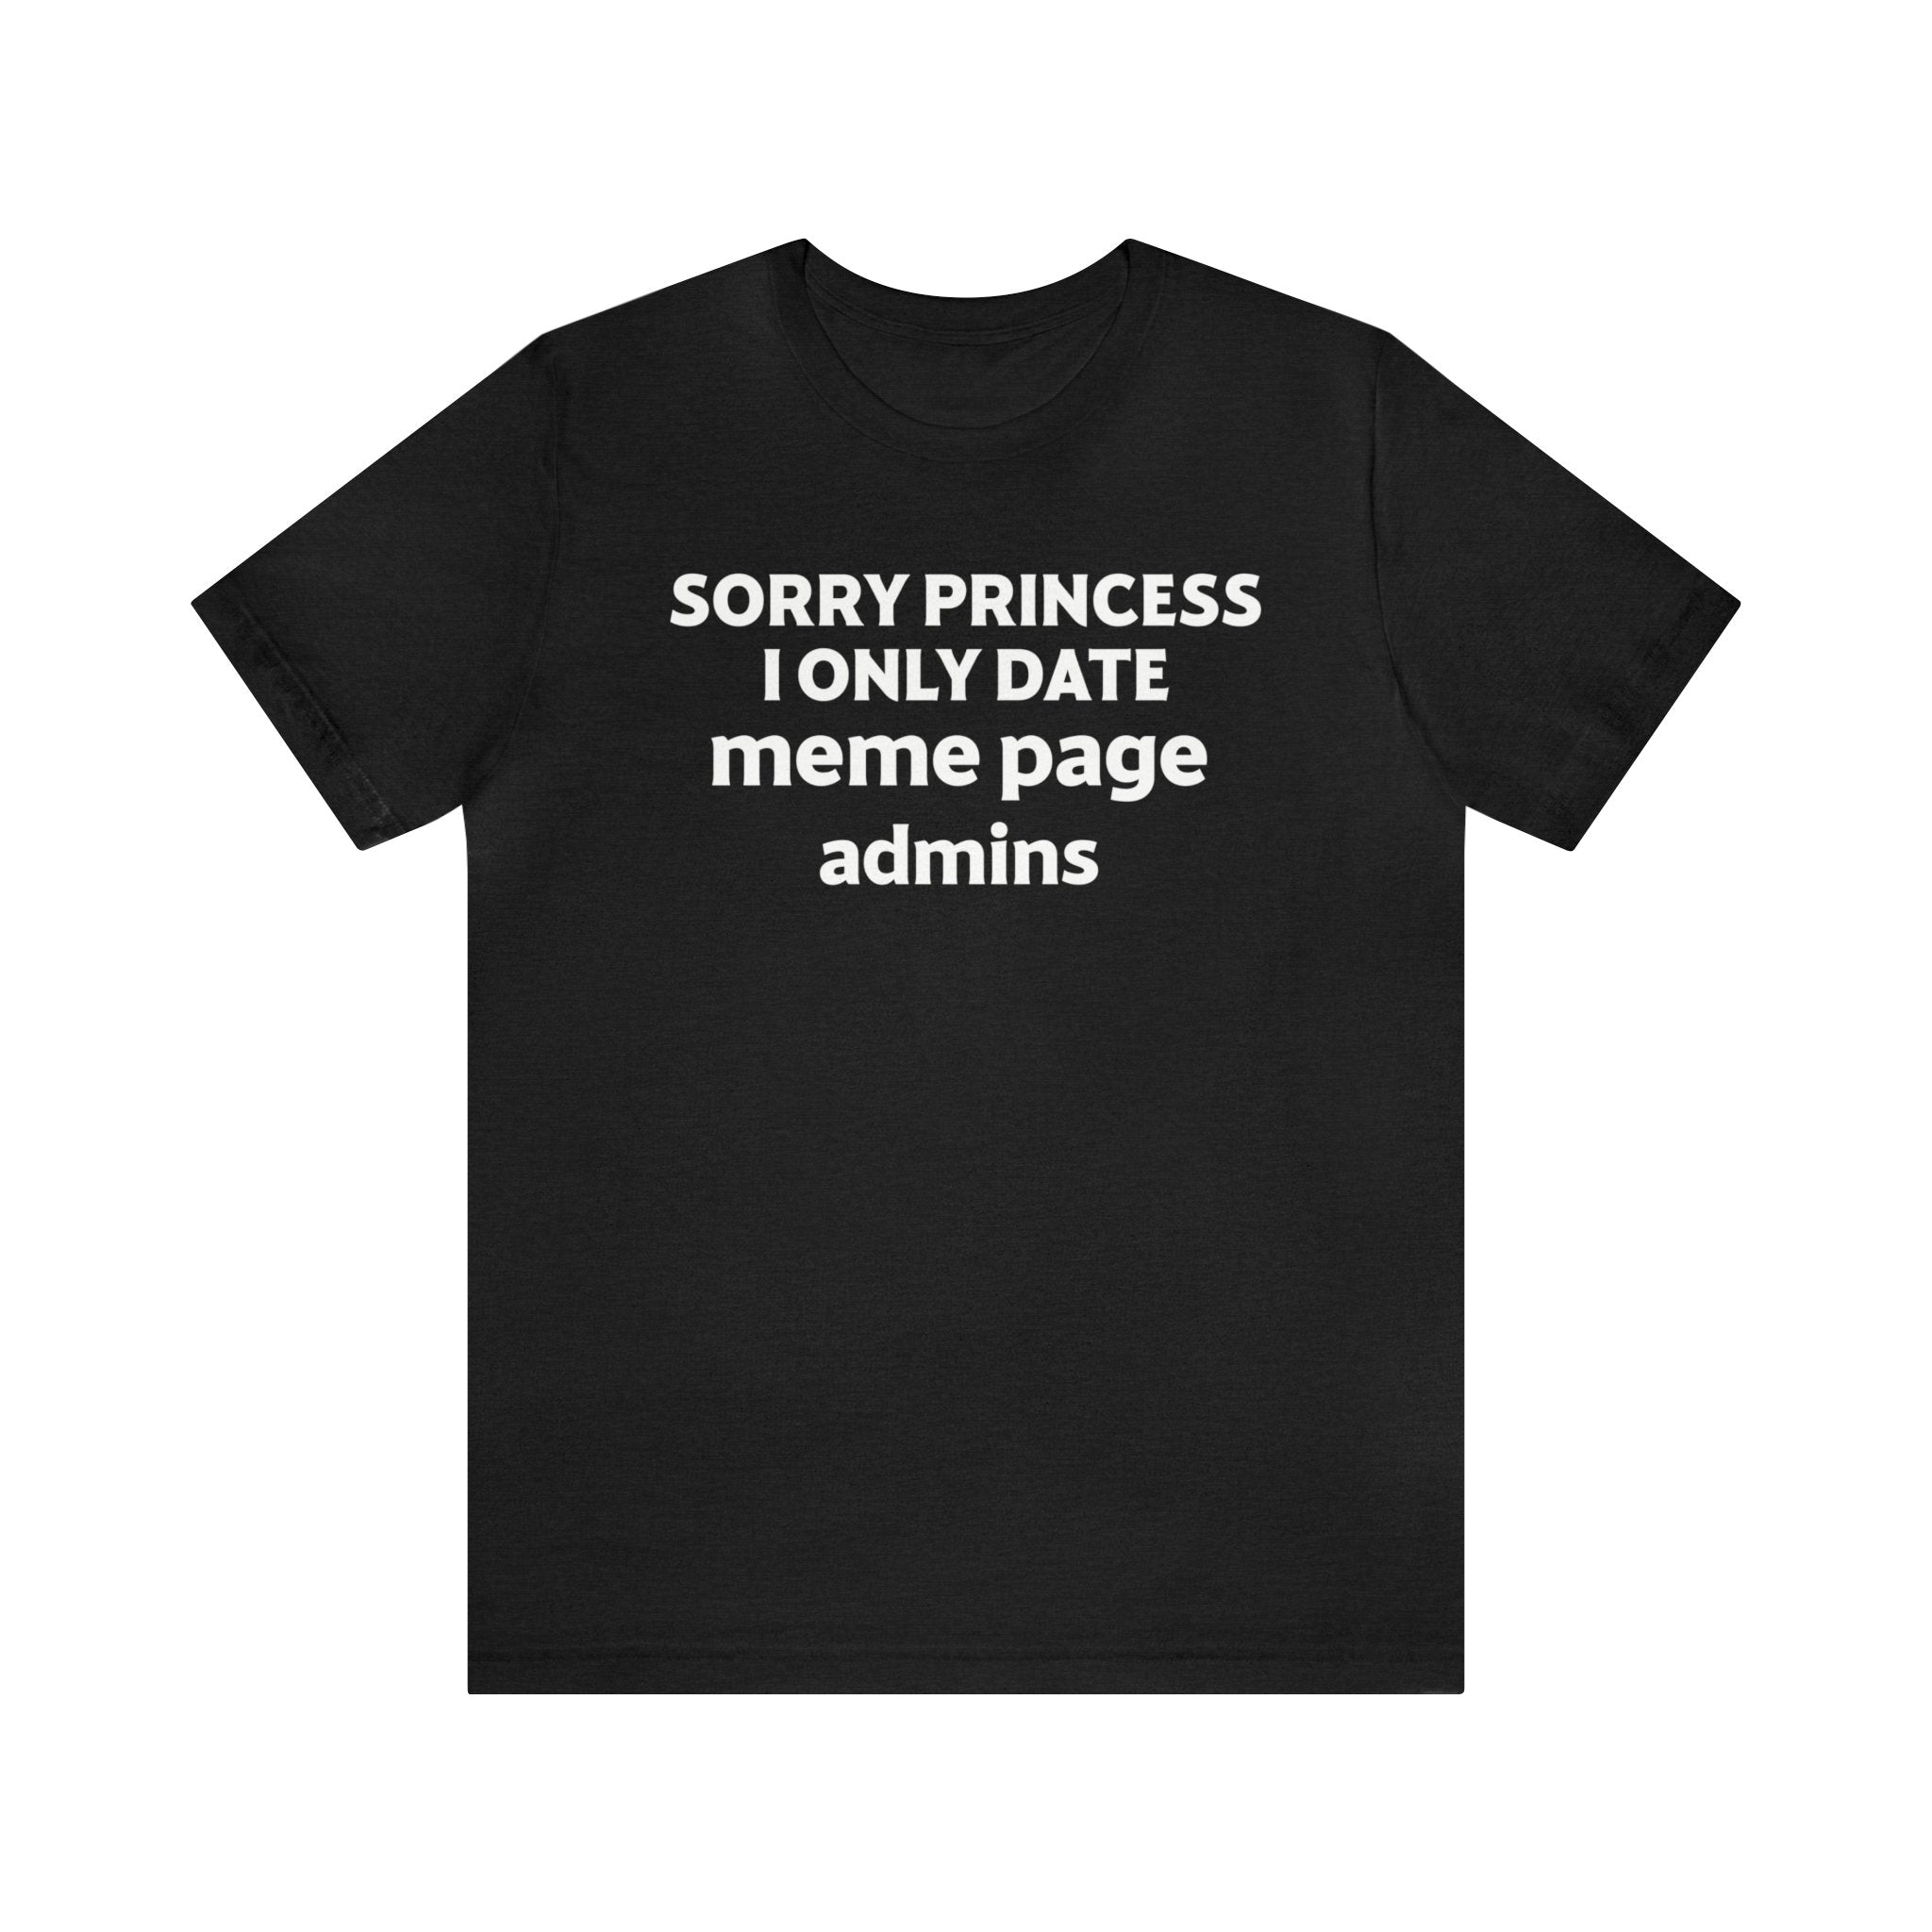 Order your "Sorry Princess T-Shirt" today!